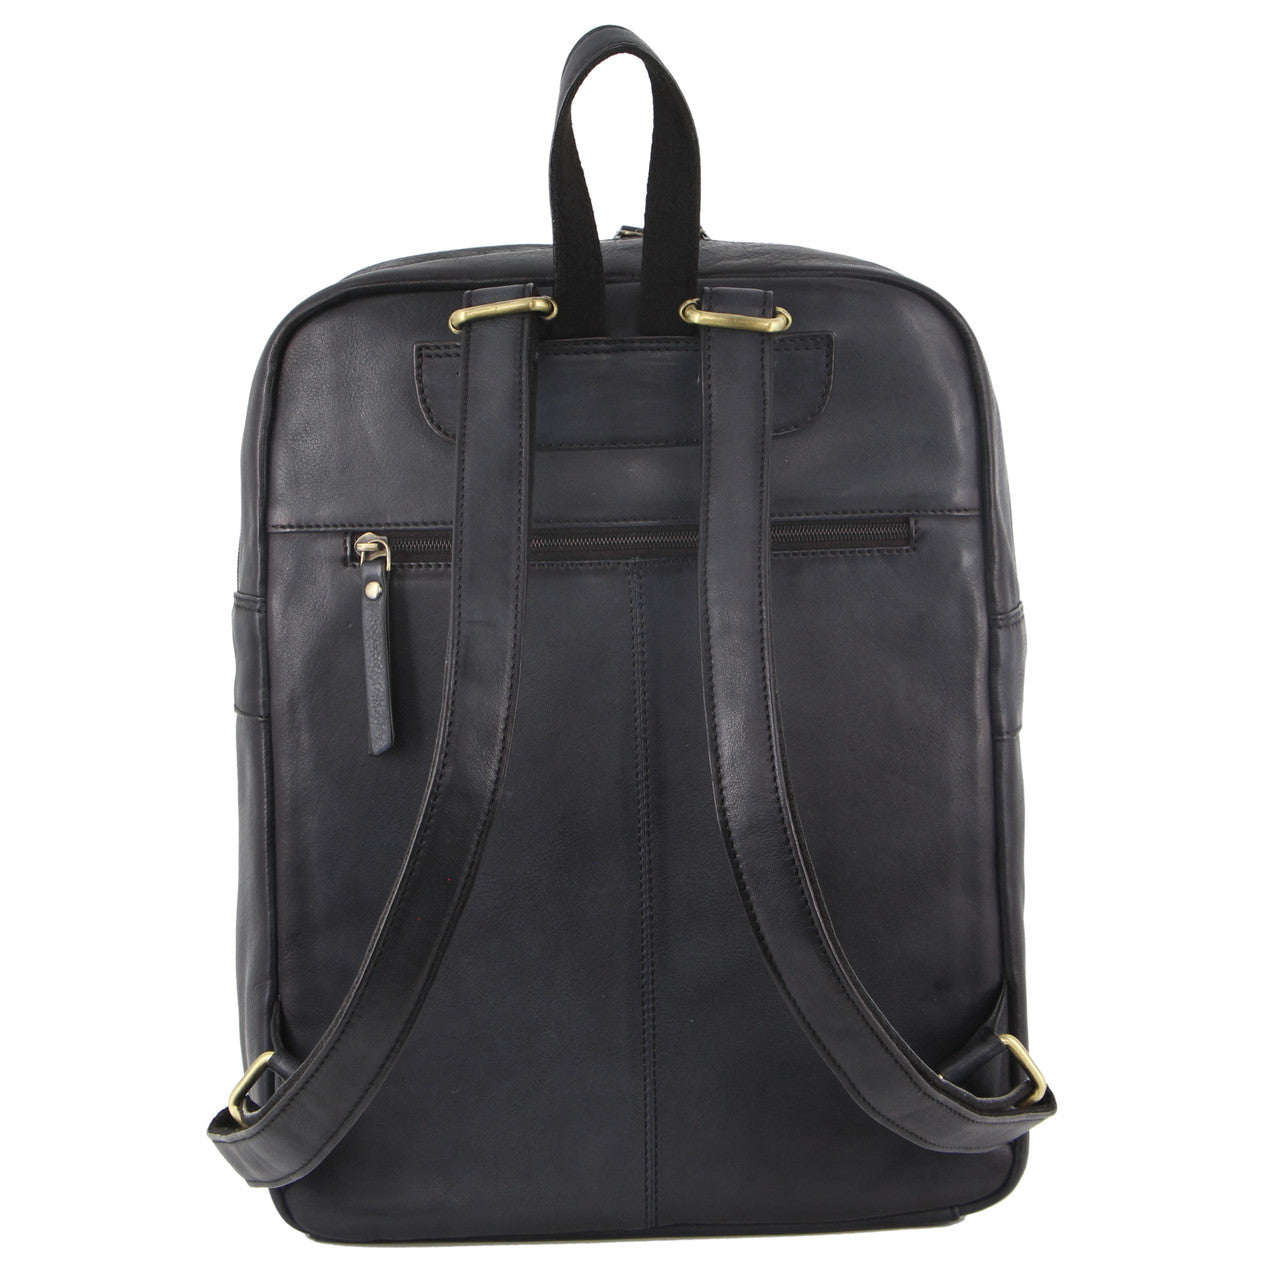 Pierre Cardin Burnished Leather Multi-Compartment Laptop Backpack PC3332 Black-3